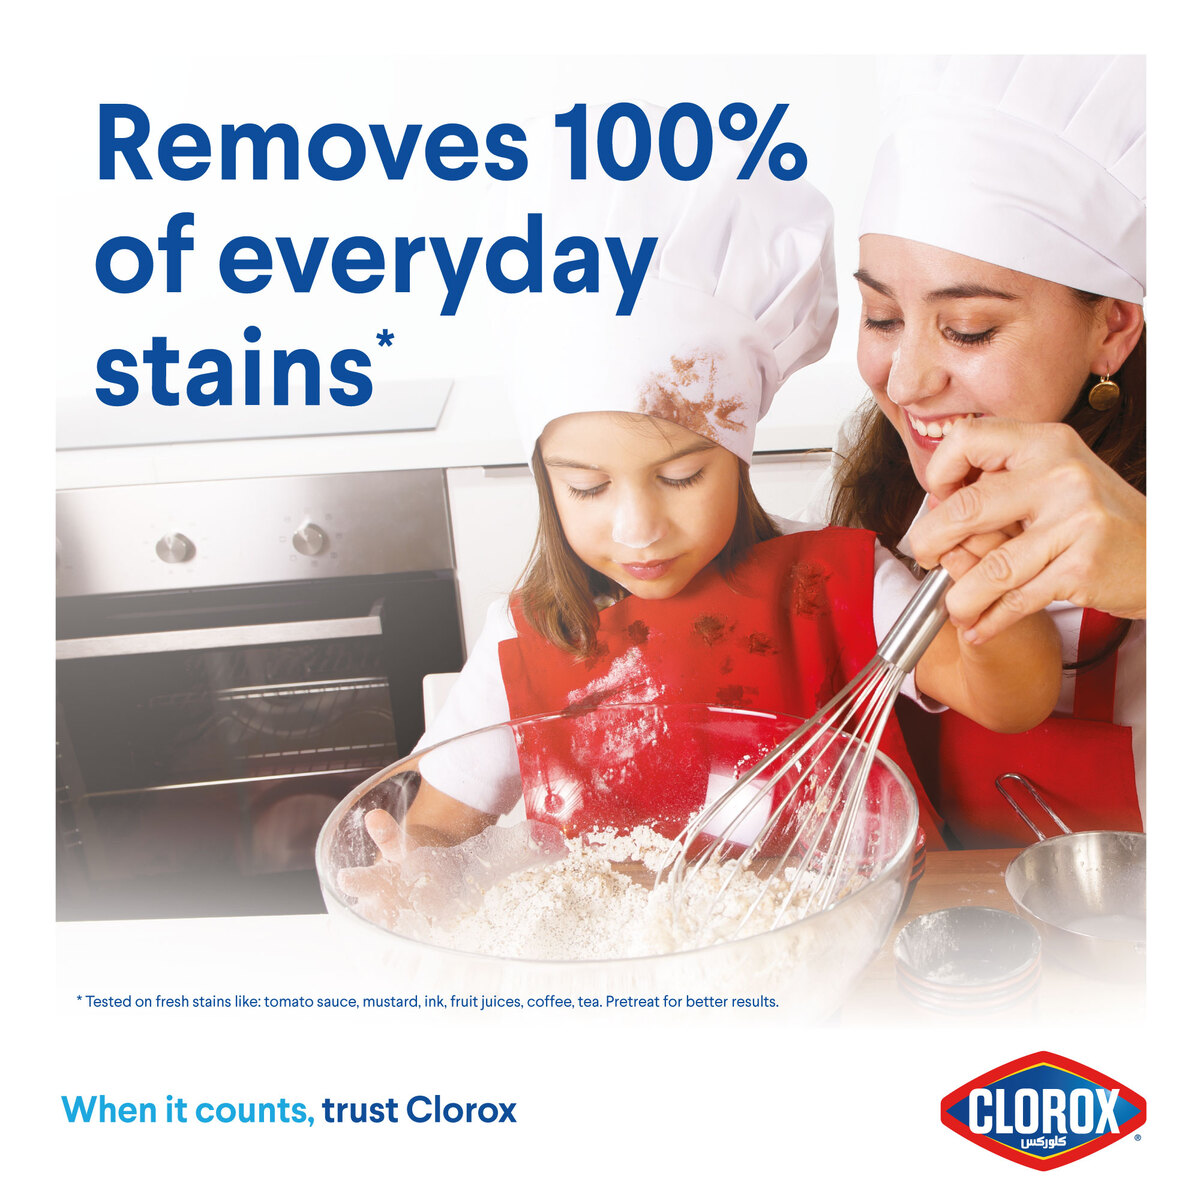 Clorox Liquid Stain Remover & Color Booster For White Clothes 900 ml